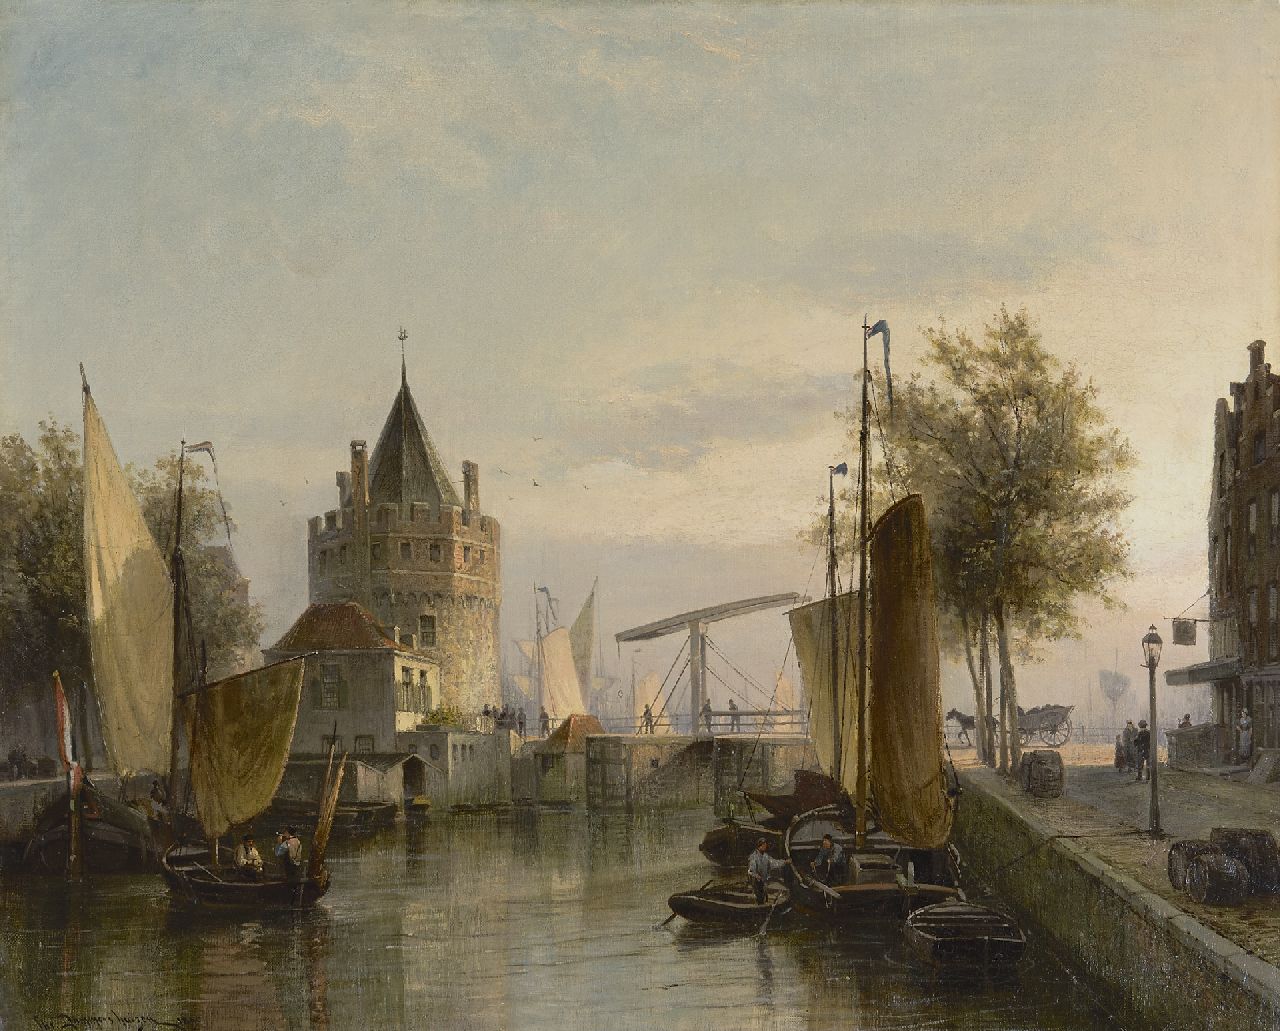 Dommelshuizen C.C.  | Cornelis Christiaan Dommelshuizen, A view of the Schreierstoren from the Geldersekade, Amsterdam, oil on canvas 52.7 x 65.0 cm, signed l.l. and dated 1890